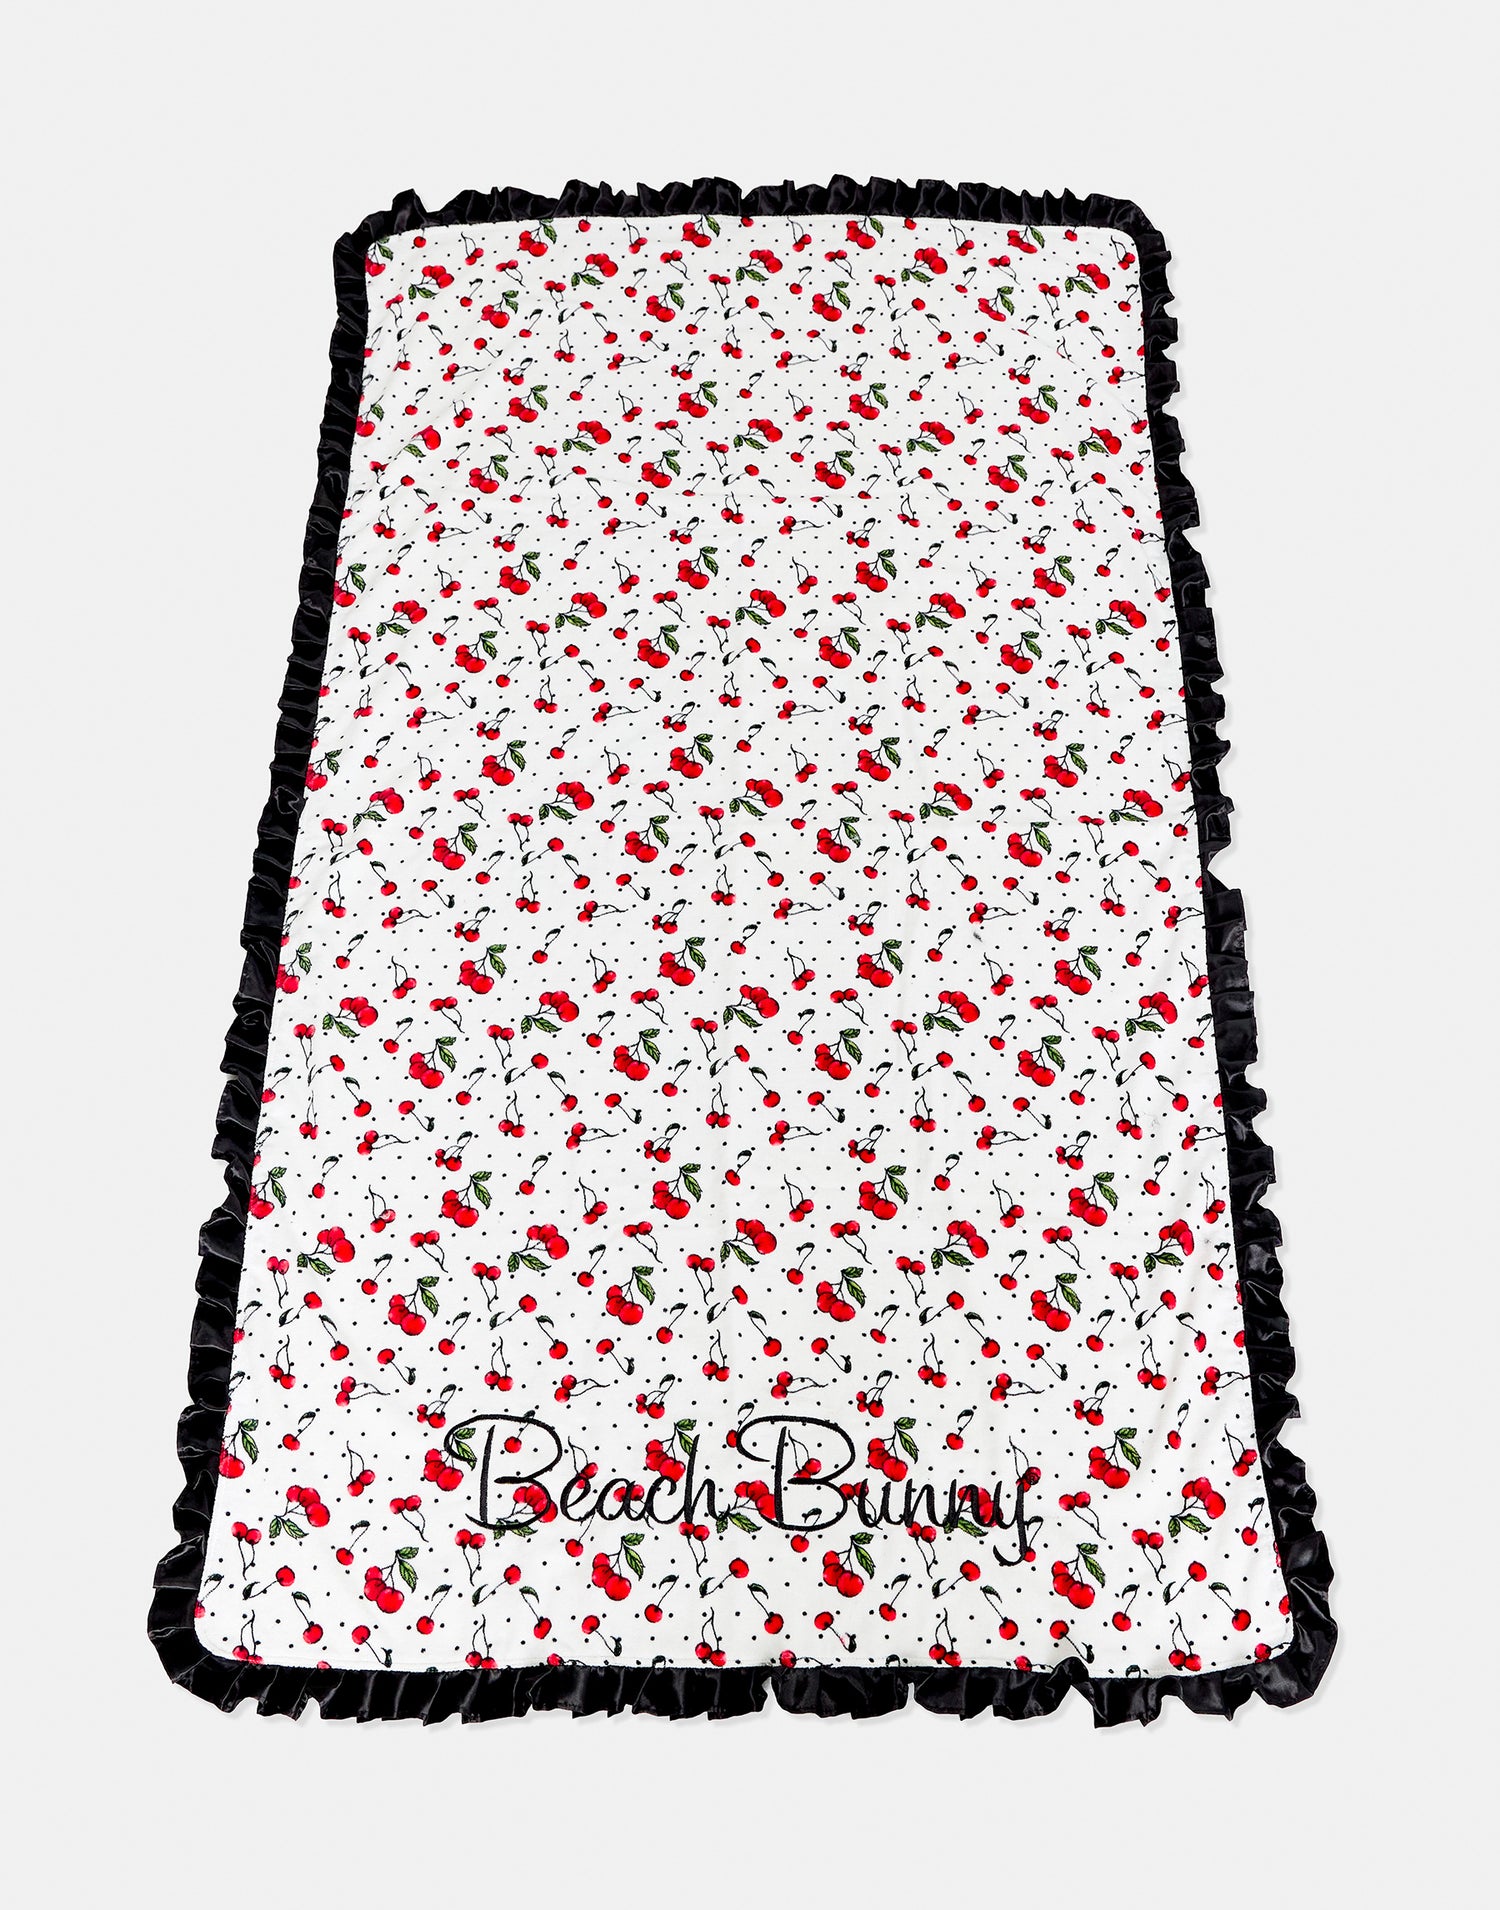 Beach Bunny Towel in Cherry Dot with Black Ruffle - Front View